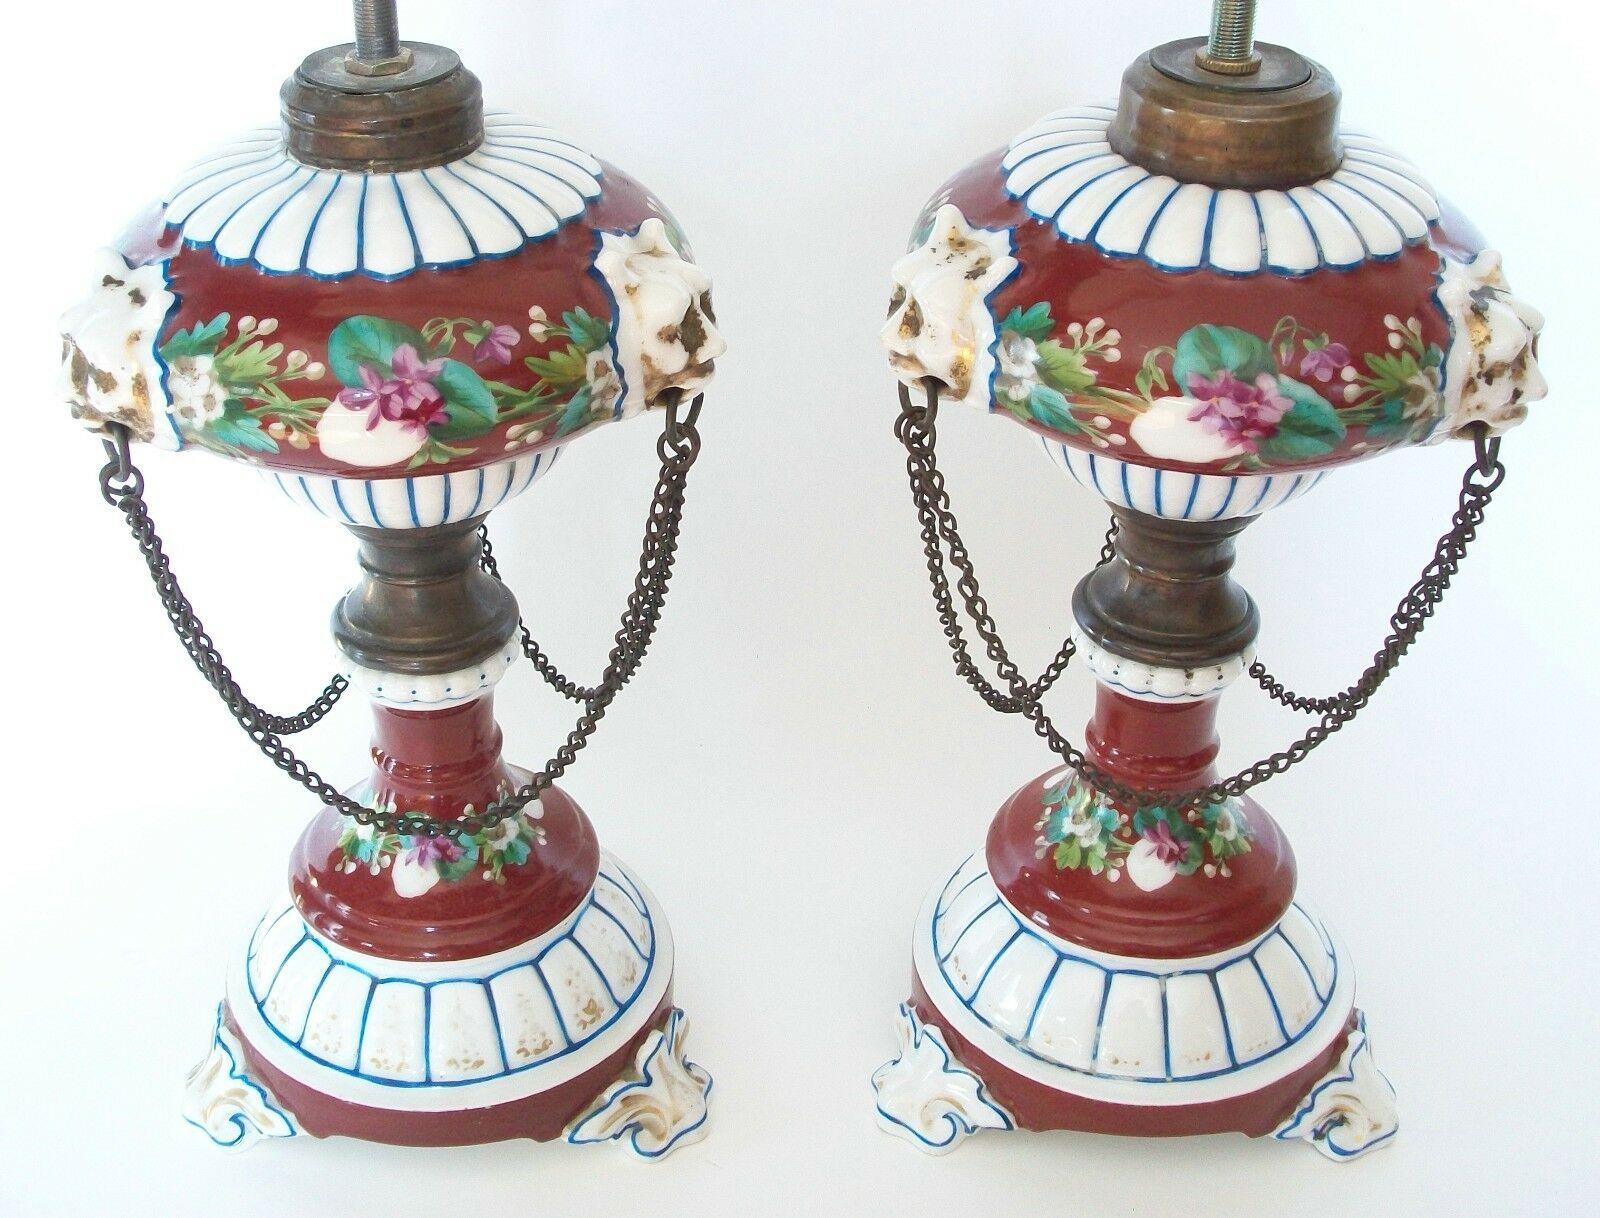 British Victorian Hand Painted Ceramic Oil Lamps with Chain Swags & Lion Masks, C.1850 For Sale